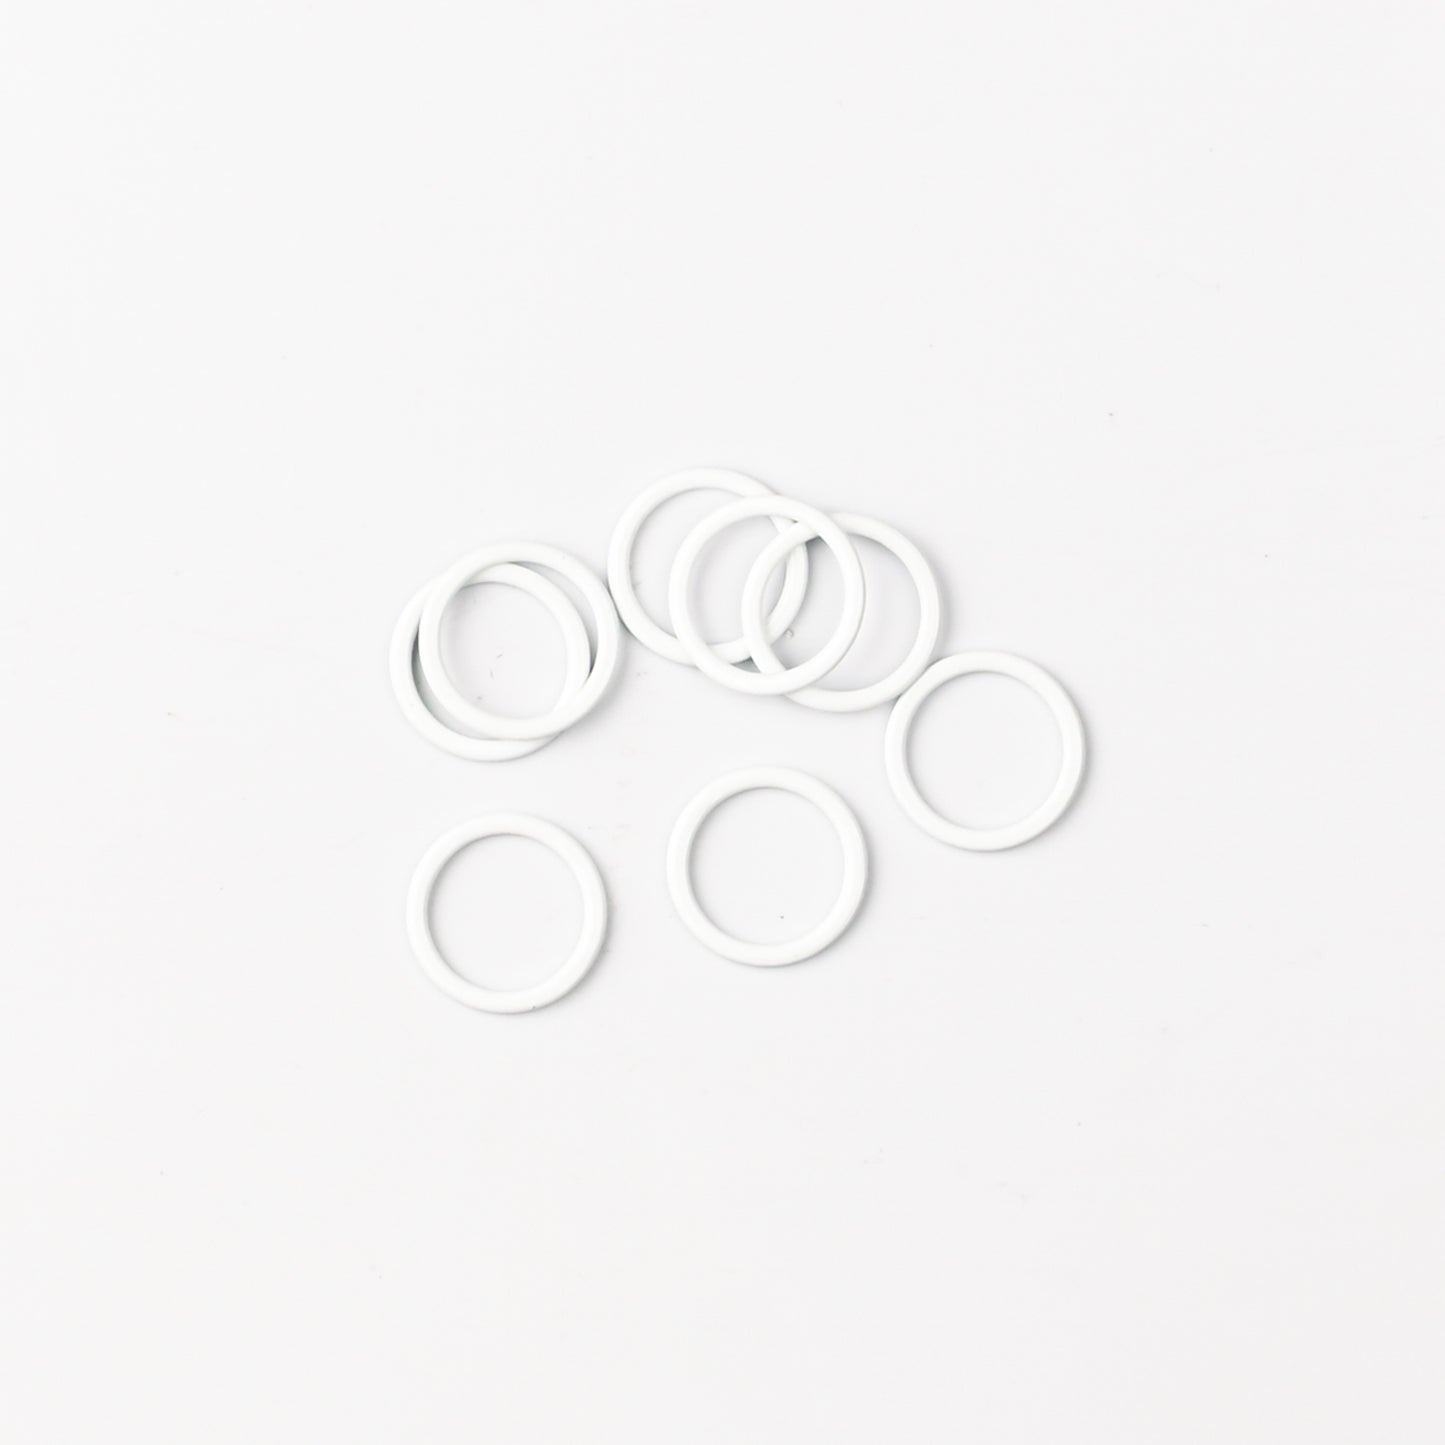 Bra Accessories Circle 12mm Black & White - TO BE DISCONTINUED